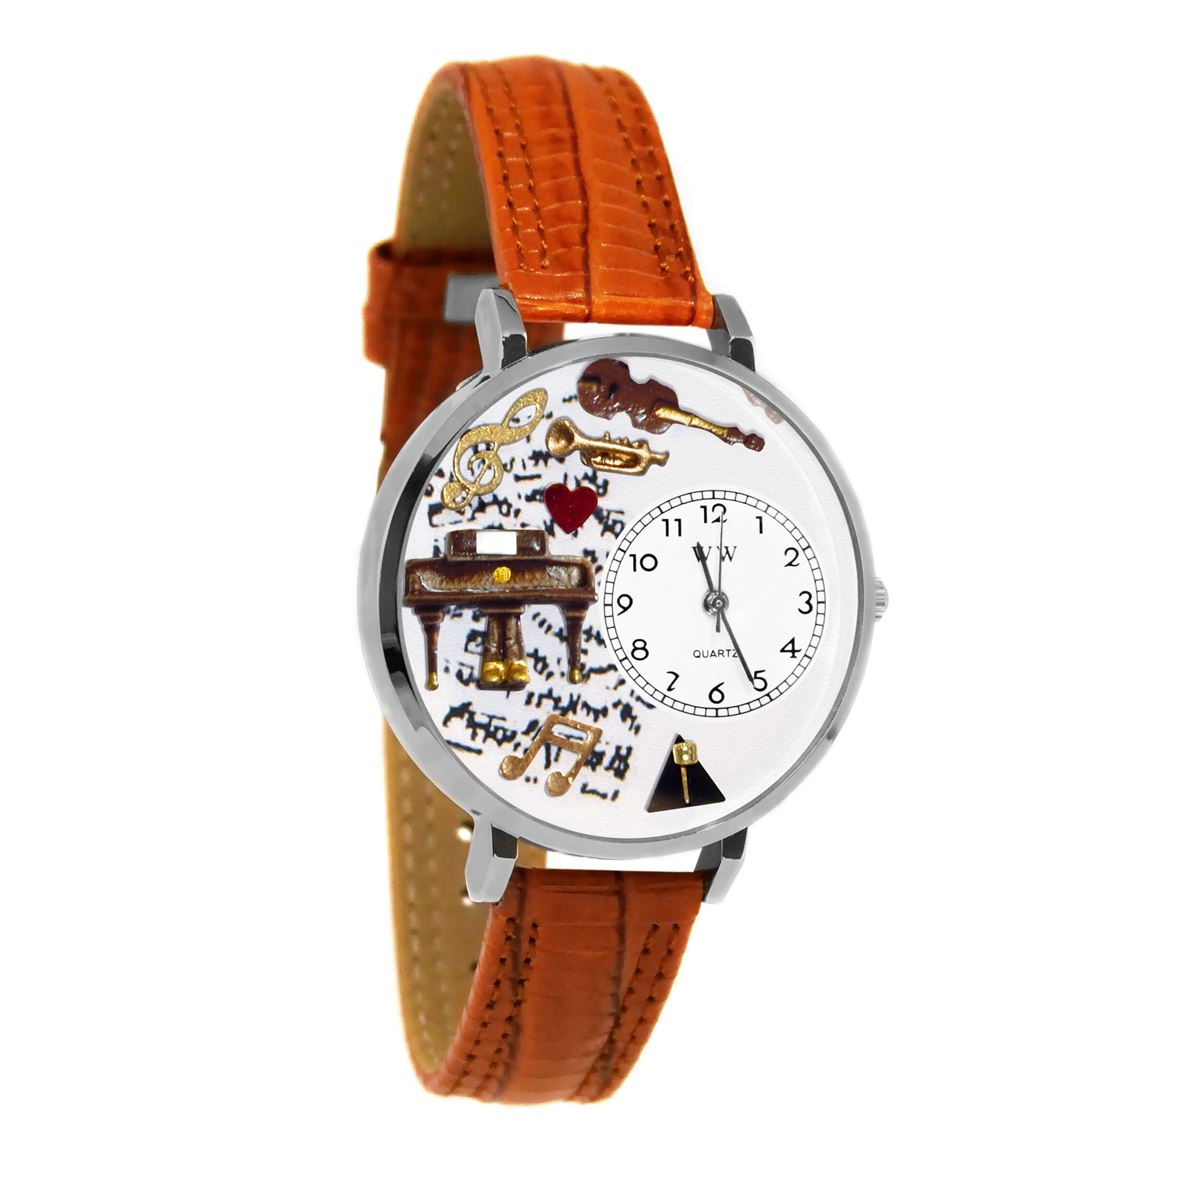 Whimsical Gifts | Music Piano 3D Watch Large Style | Handmade in USA | Hobbies & Special Interests | Music | Novelty Unique Fun Miniatures Gift | Silver Finish Tan Leather Watch Band